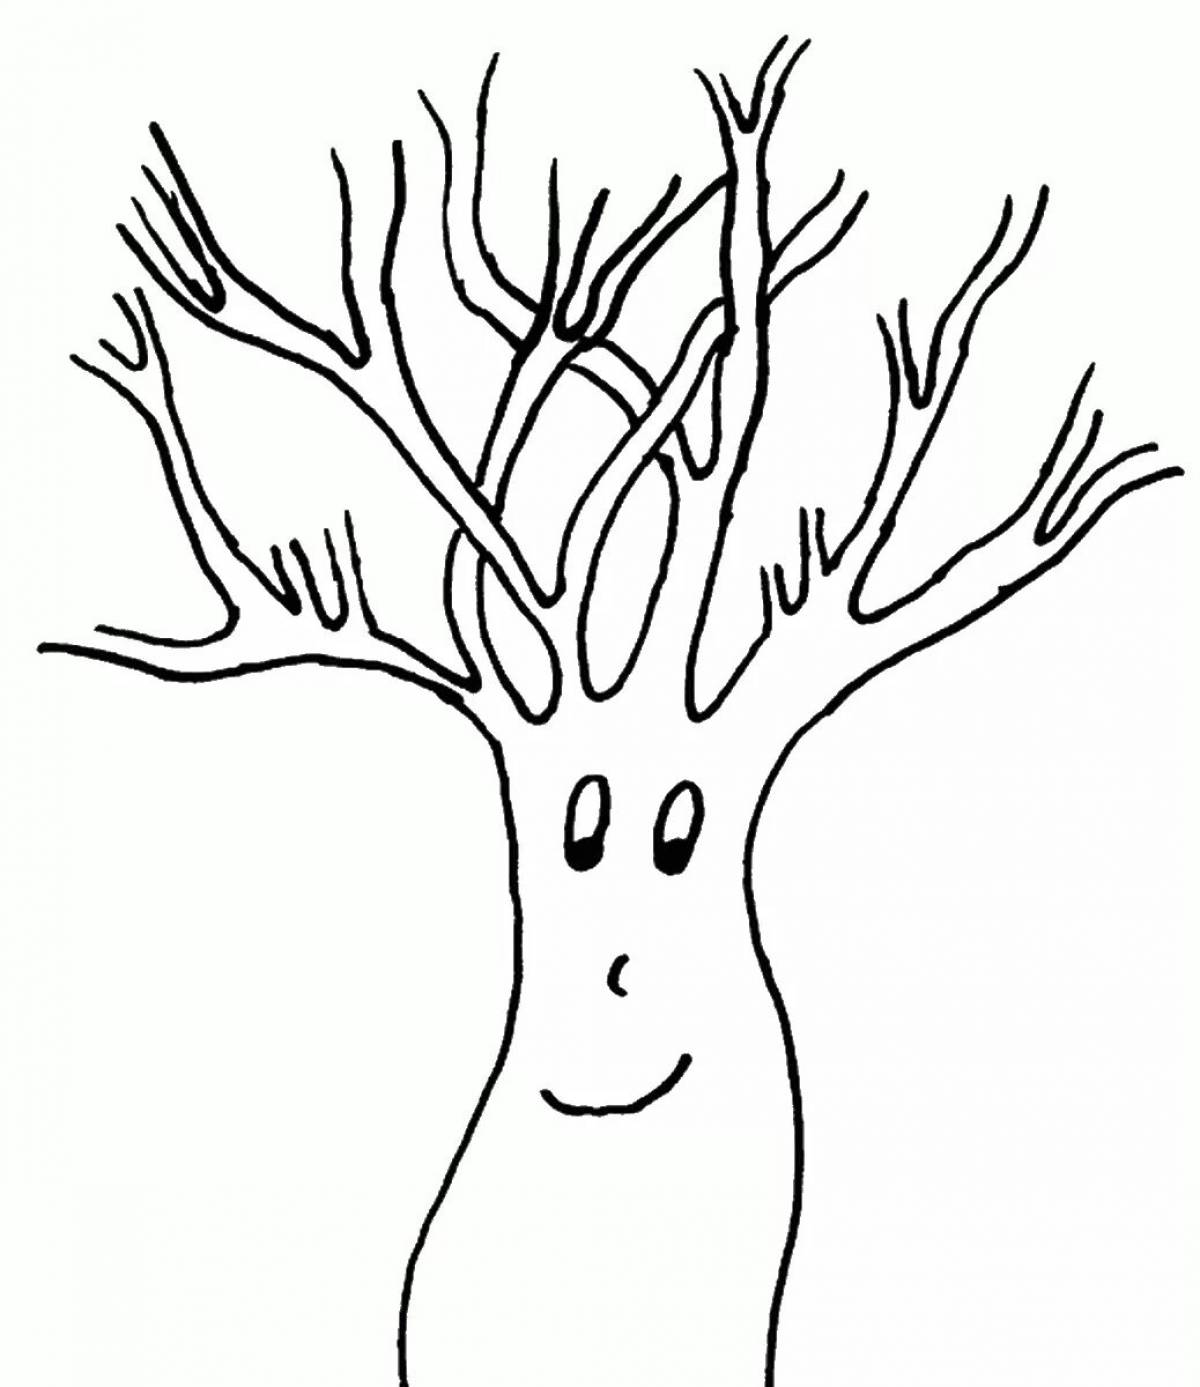 Tree without leaves outline #13